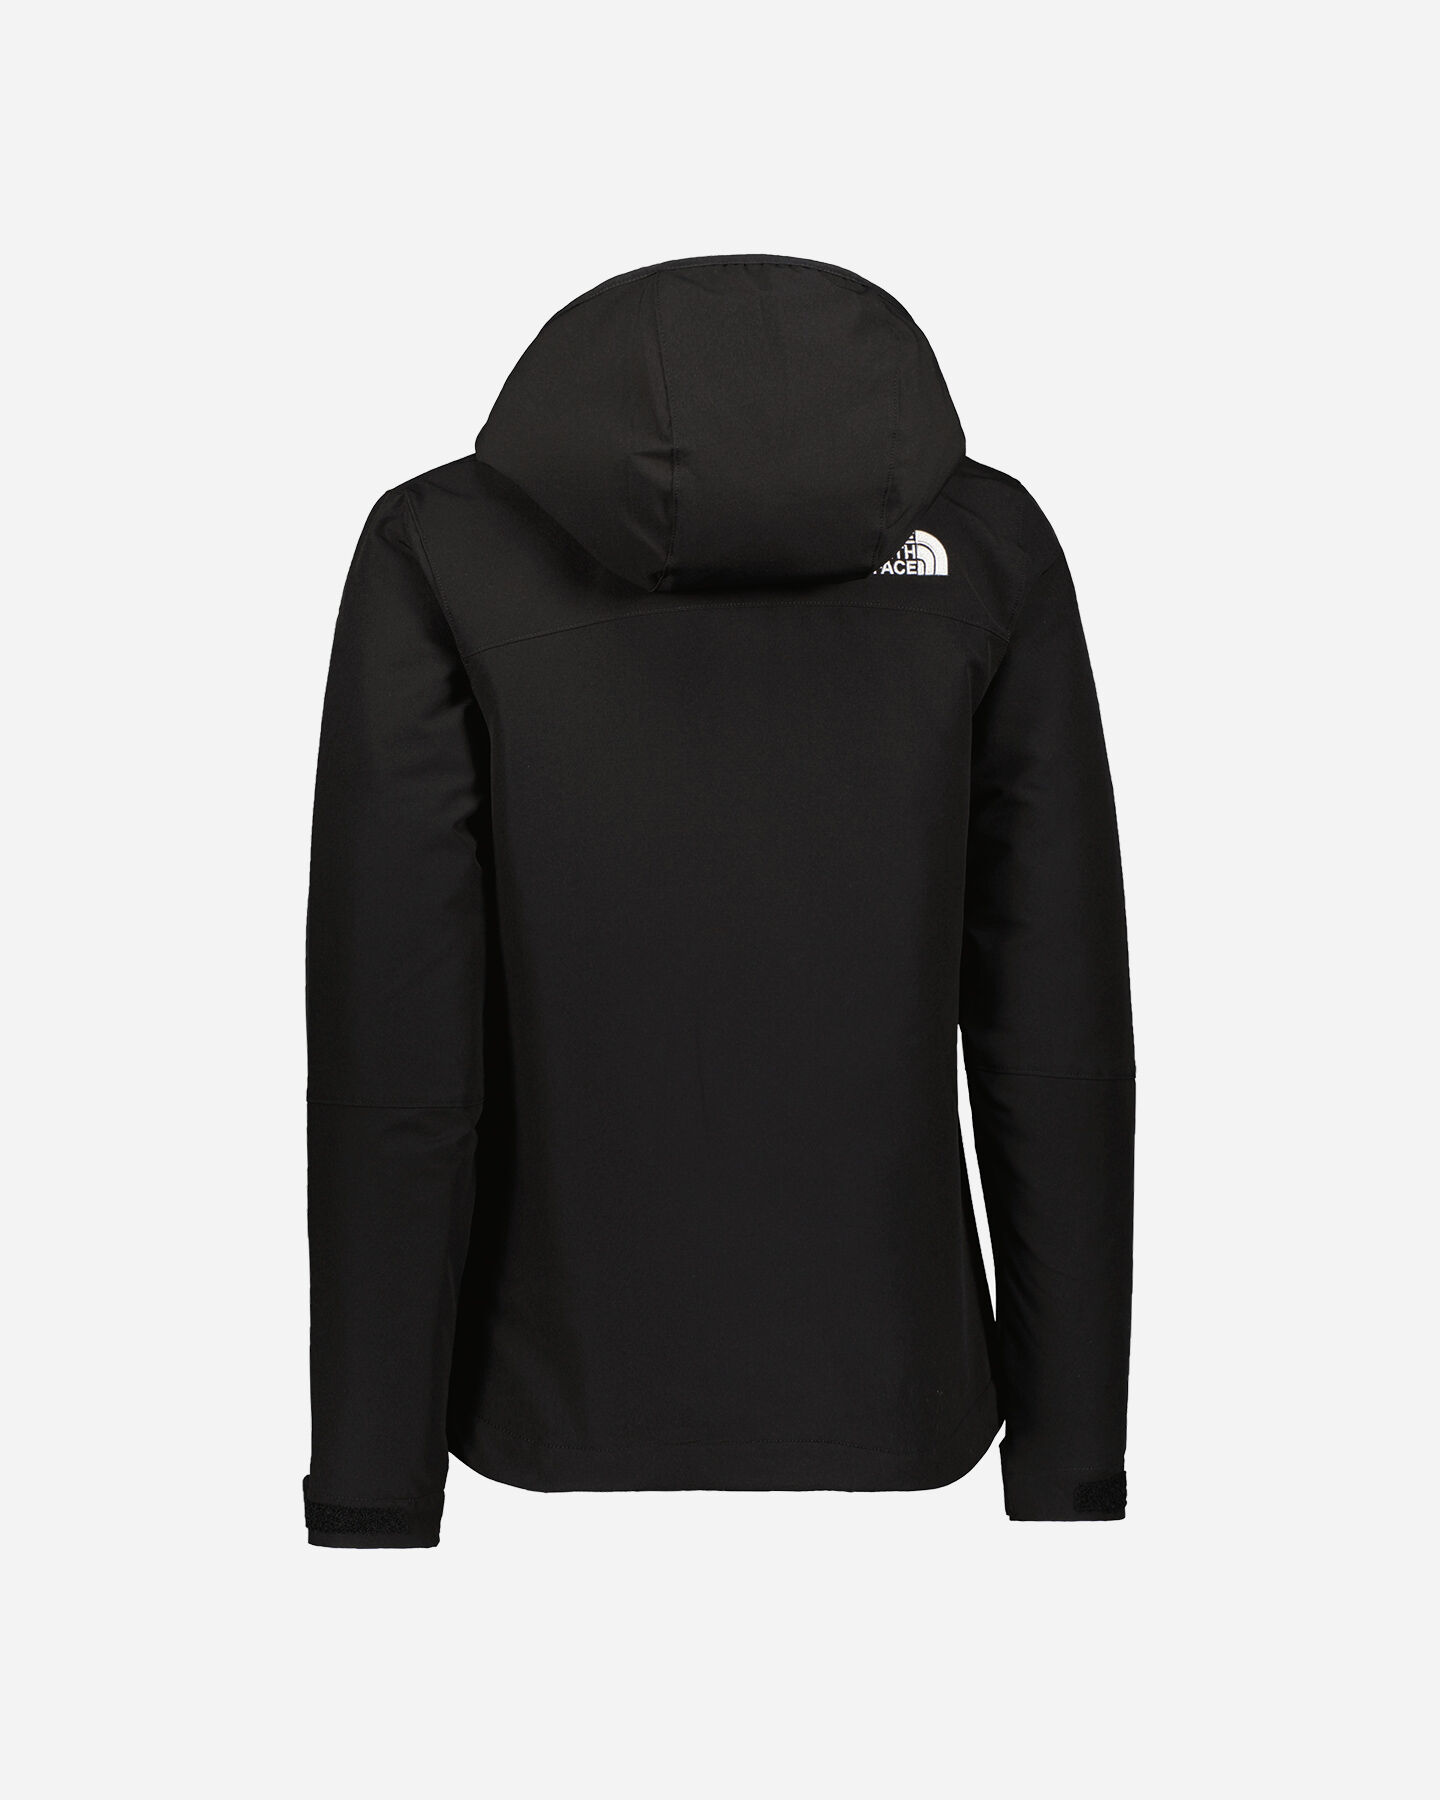  Pile THE NORTH FACE SOFTSHELL W S5477962|JK3|S scatto 1